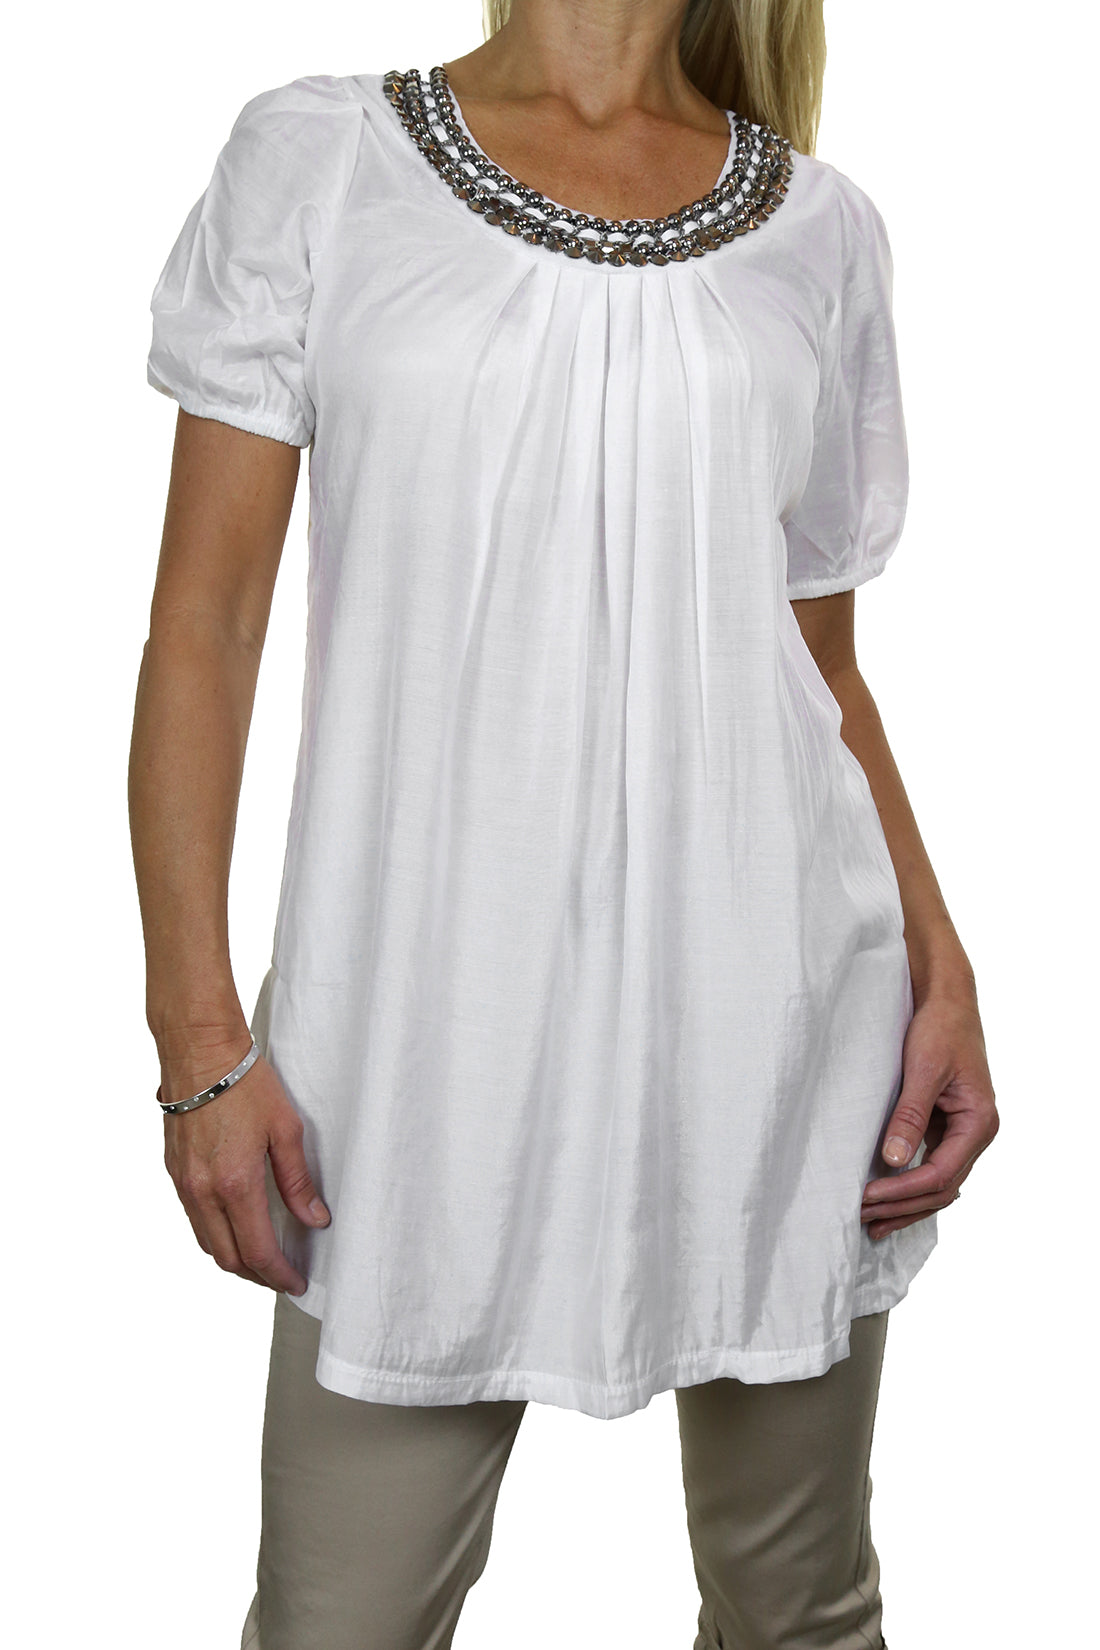 Tunic Top With Silver Bead Stud Detail White